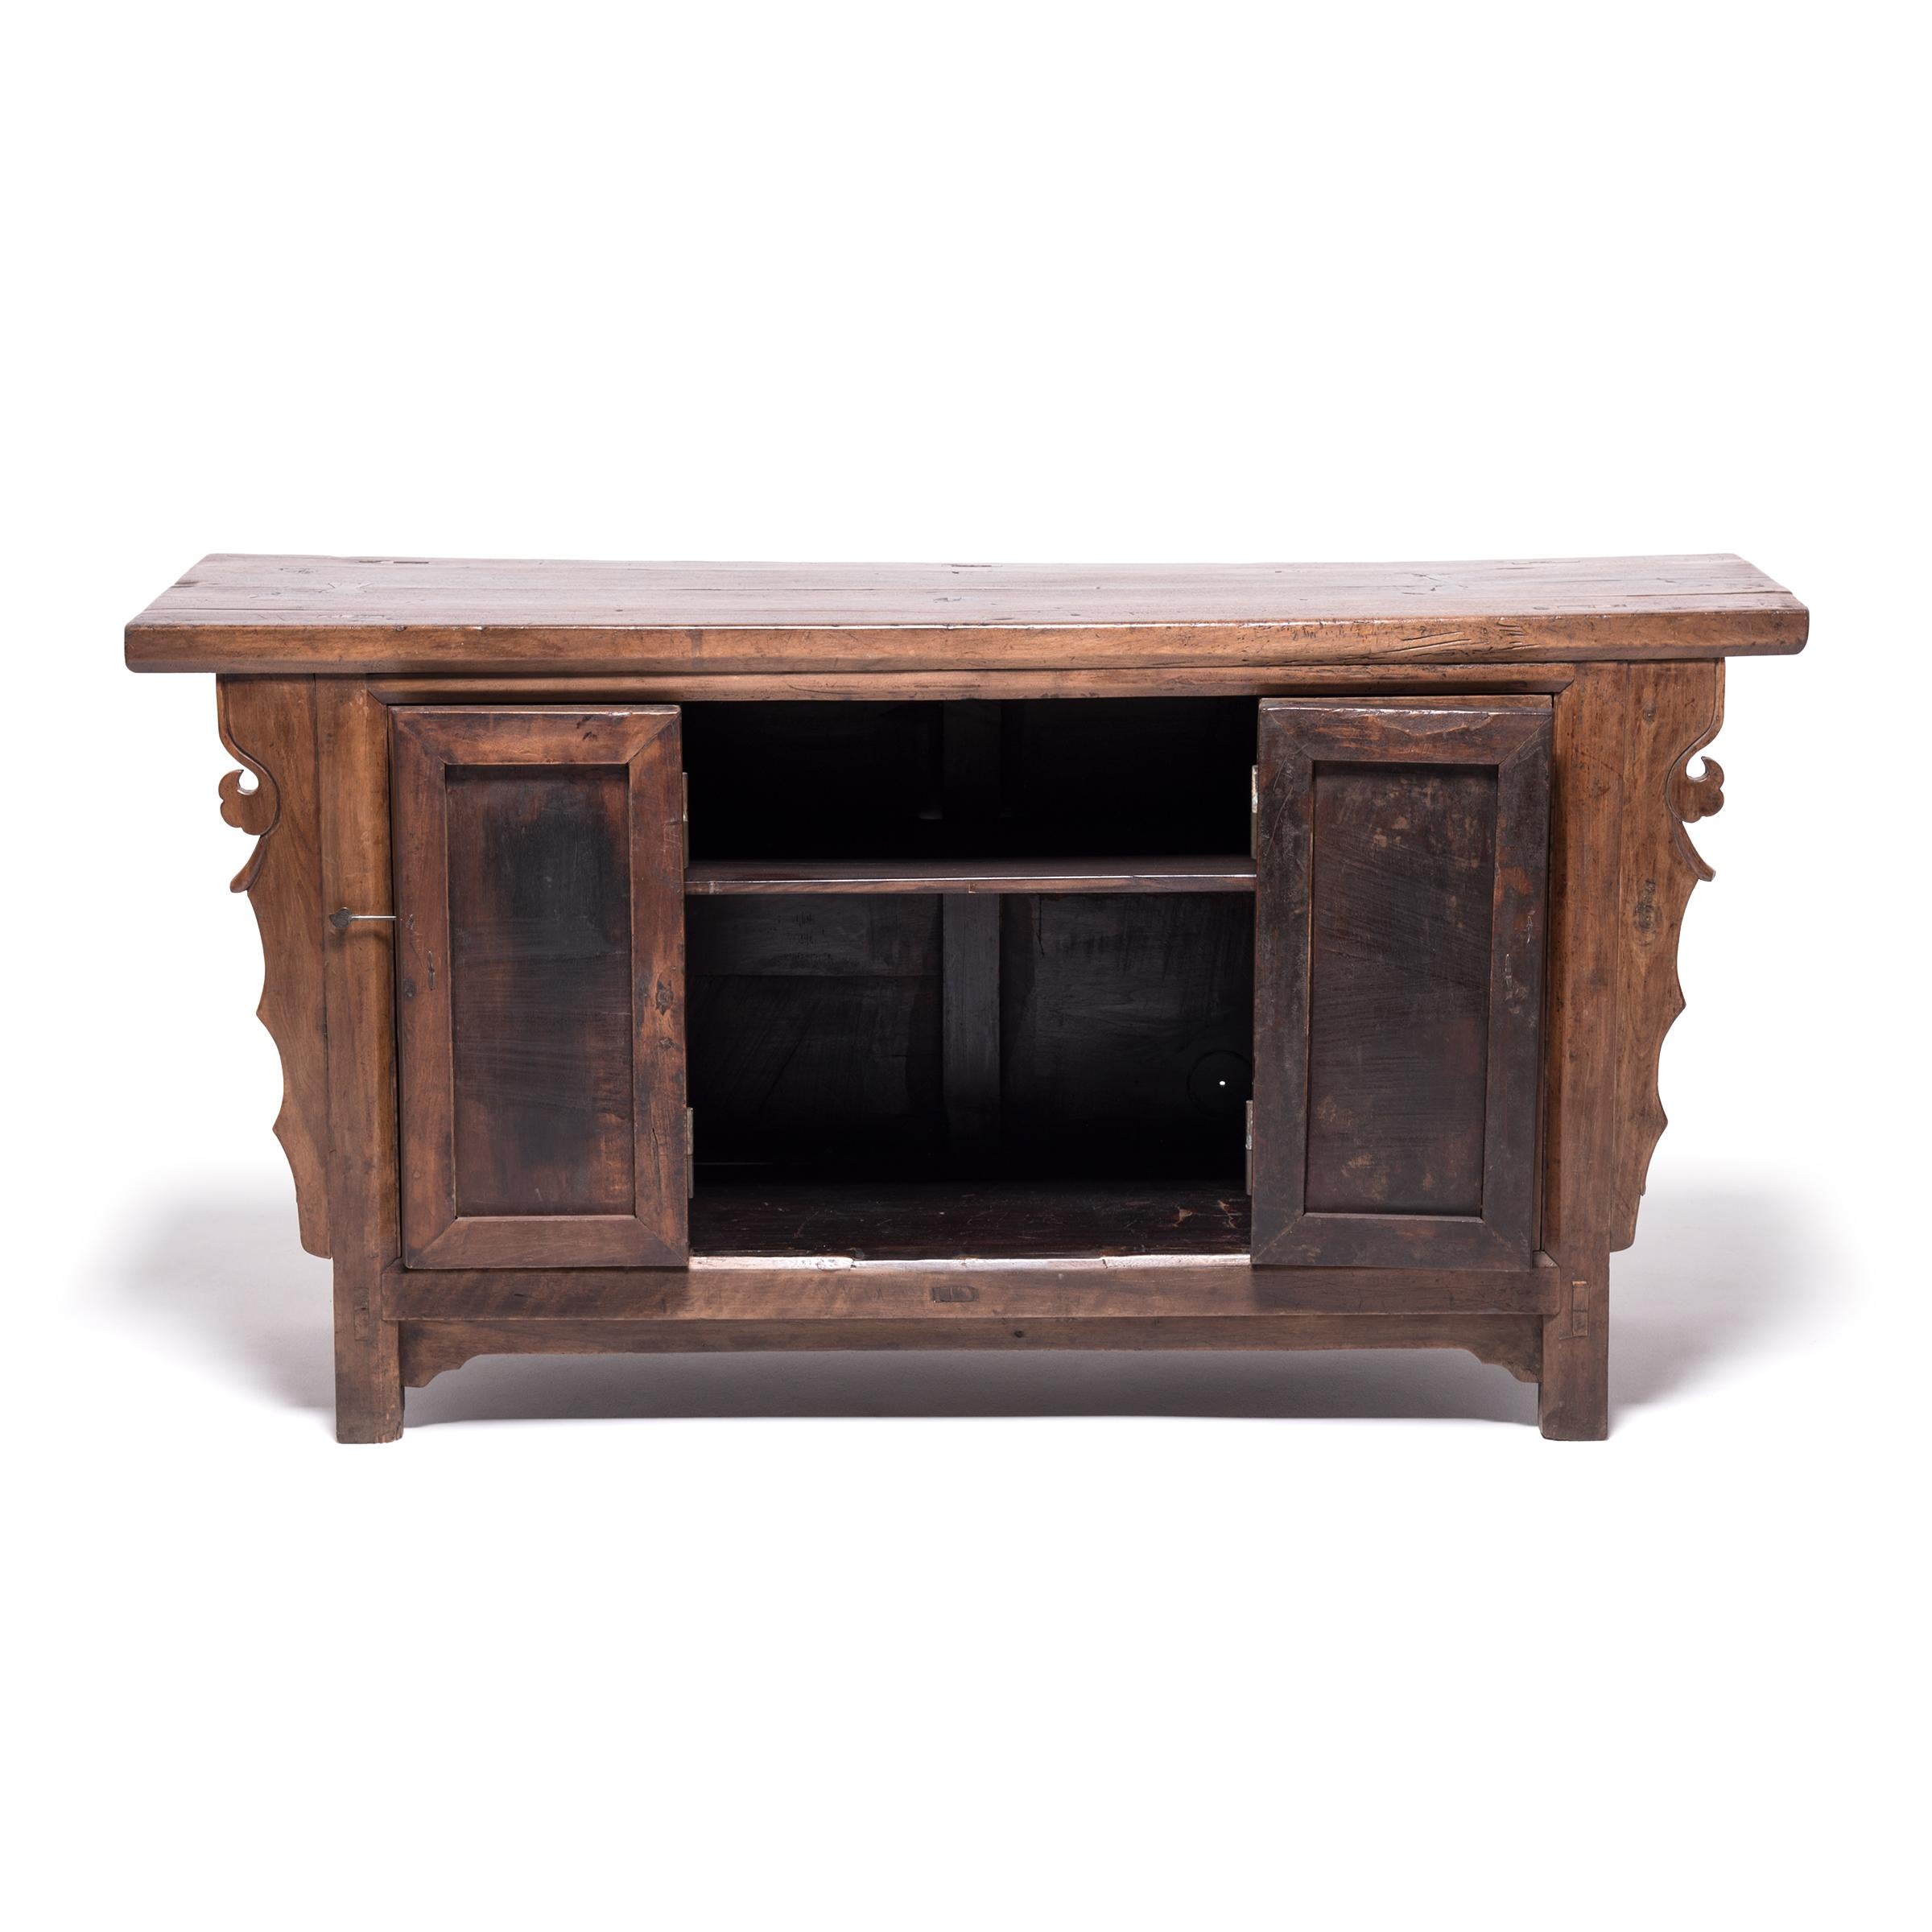 Crafted of golden walnut, a wood prized for its open-grained texture and warm tones, this 19th-century chest balances traditional simplicity with the quiet flair of its cloud spandrels. The plank top features a butterfly patch, a wabi-sabi mark of